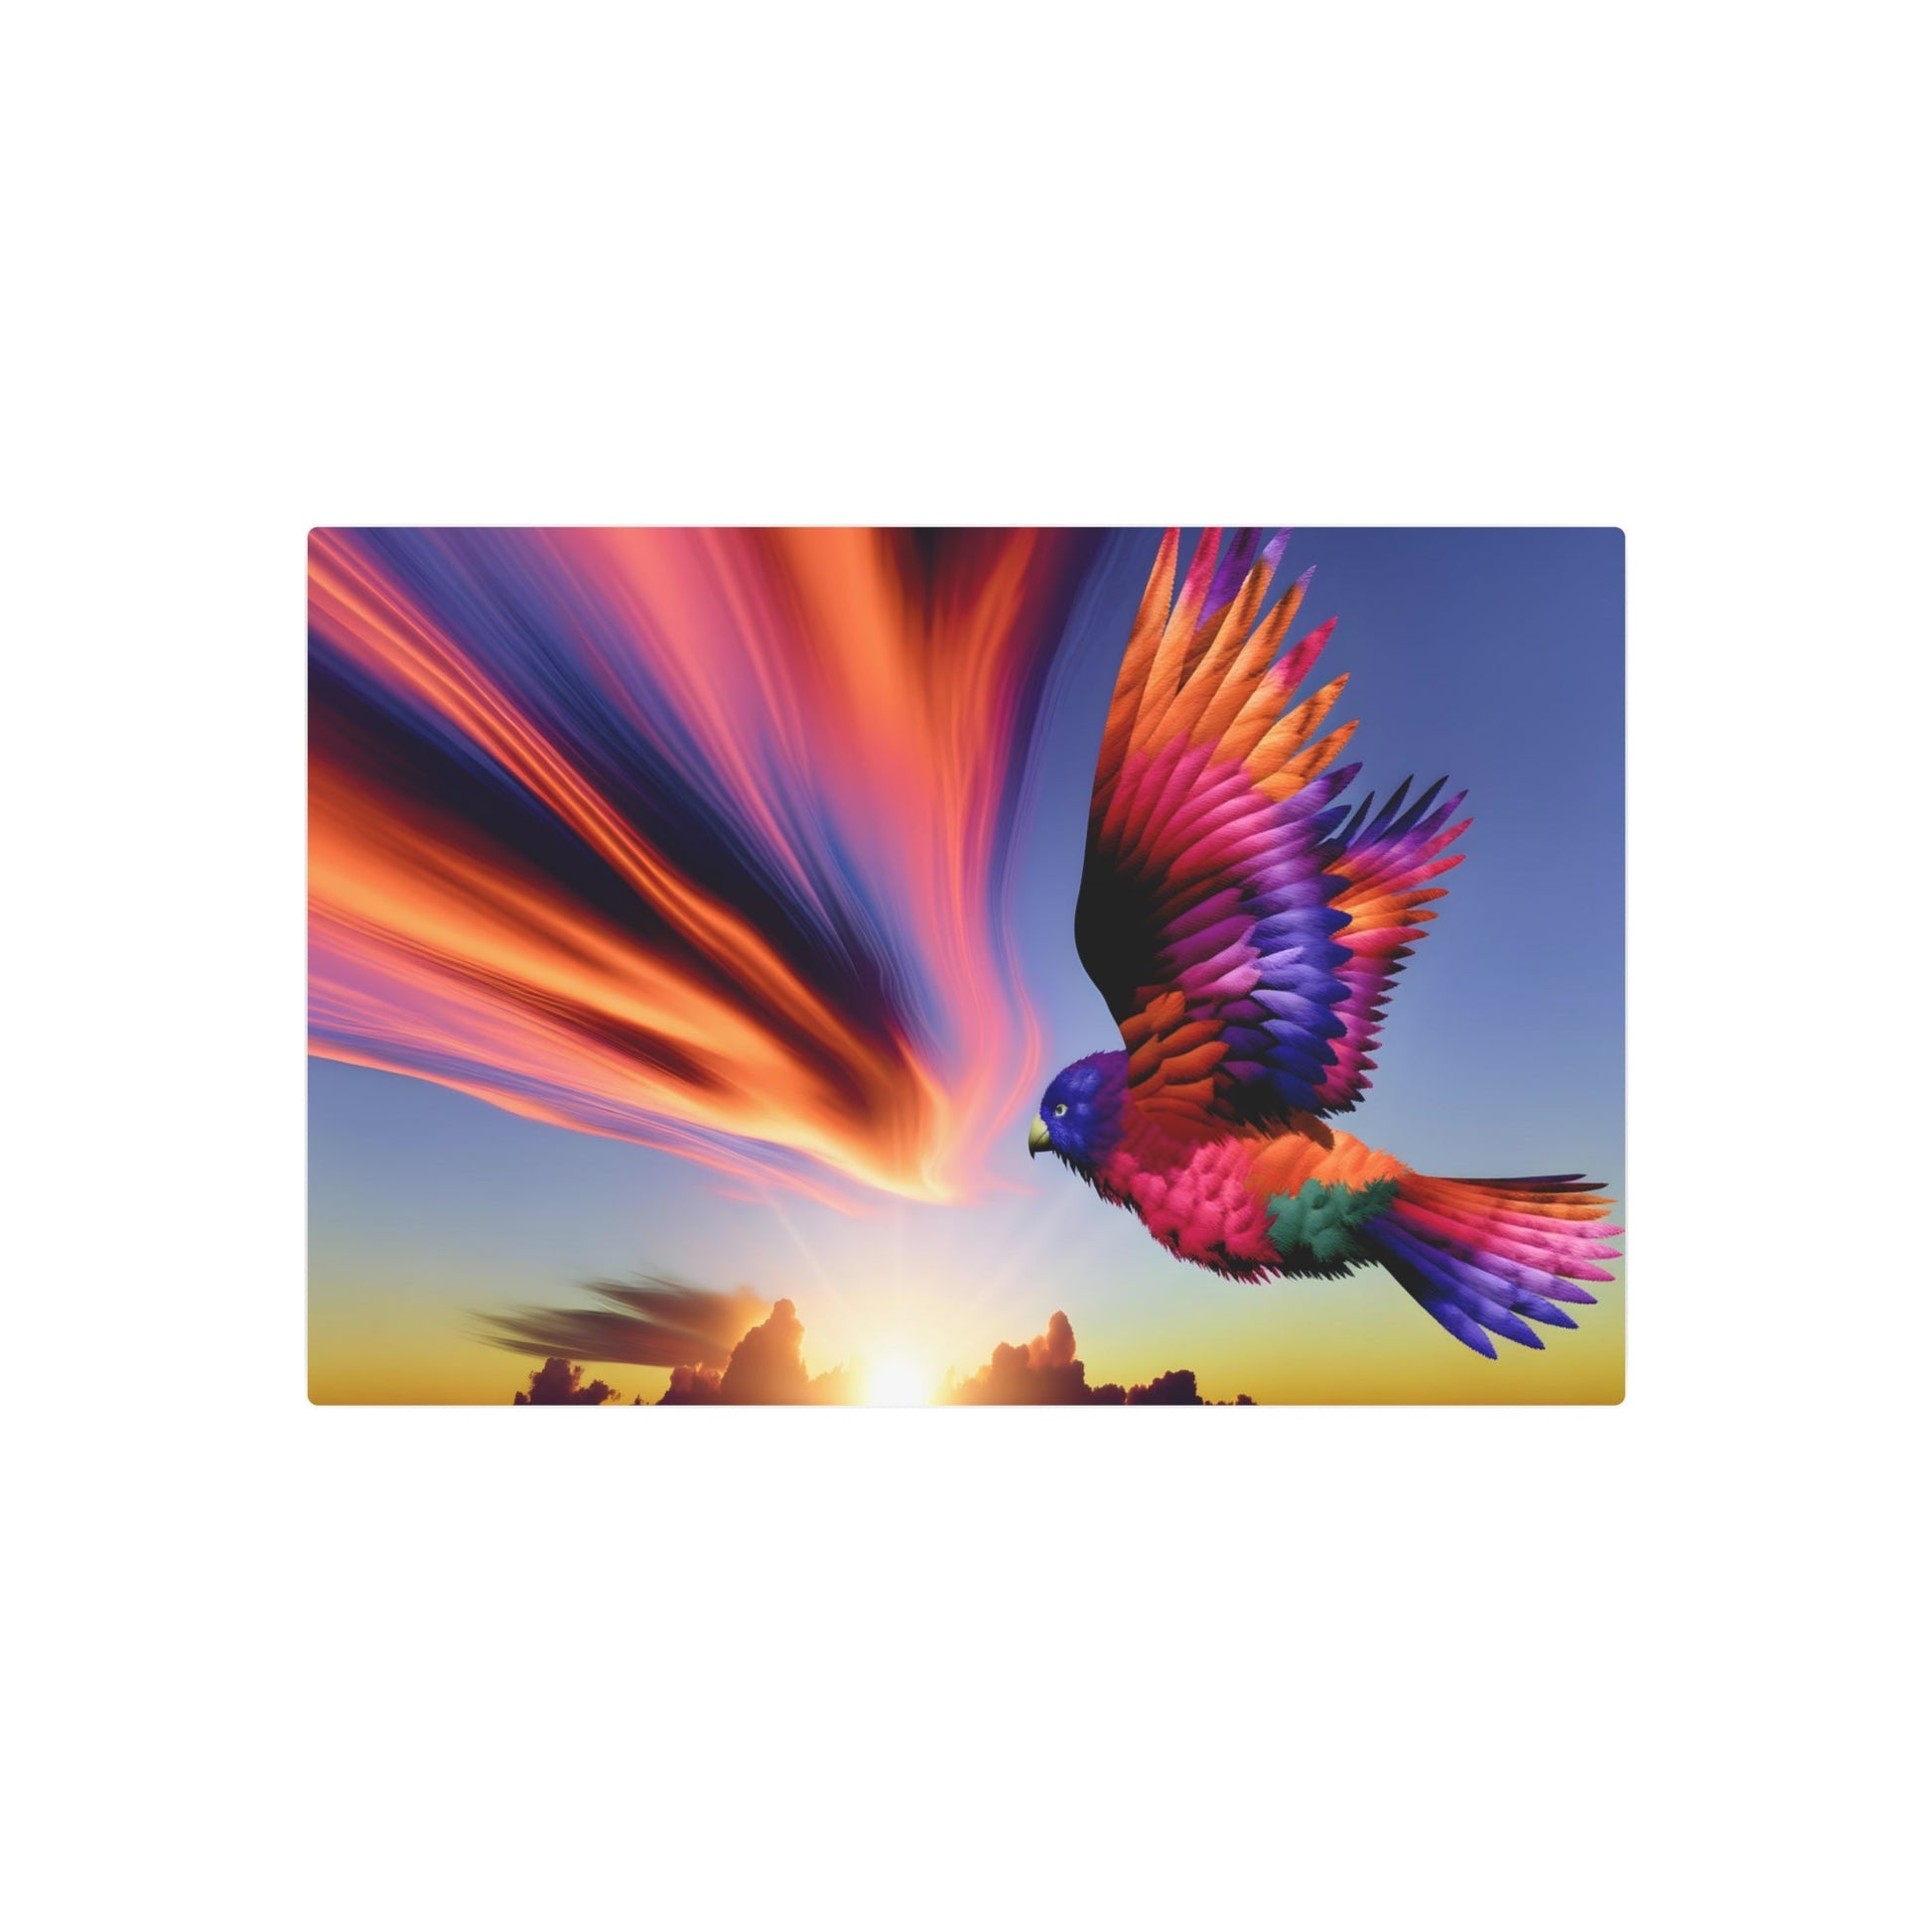 Metal Poster Art | "Vibrant and Graceful Bird Soaring at Sunset - Modern Digital Art in Contemporary Style with Realistic and Fantasy Elements" - Metal Poster Art 30″ x 20″ (Horizontal) 0.12''